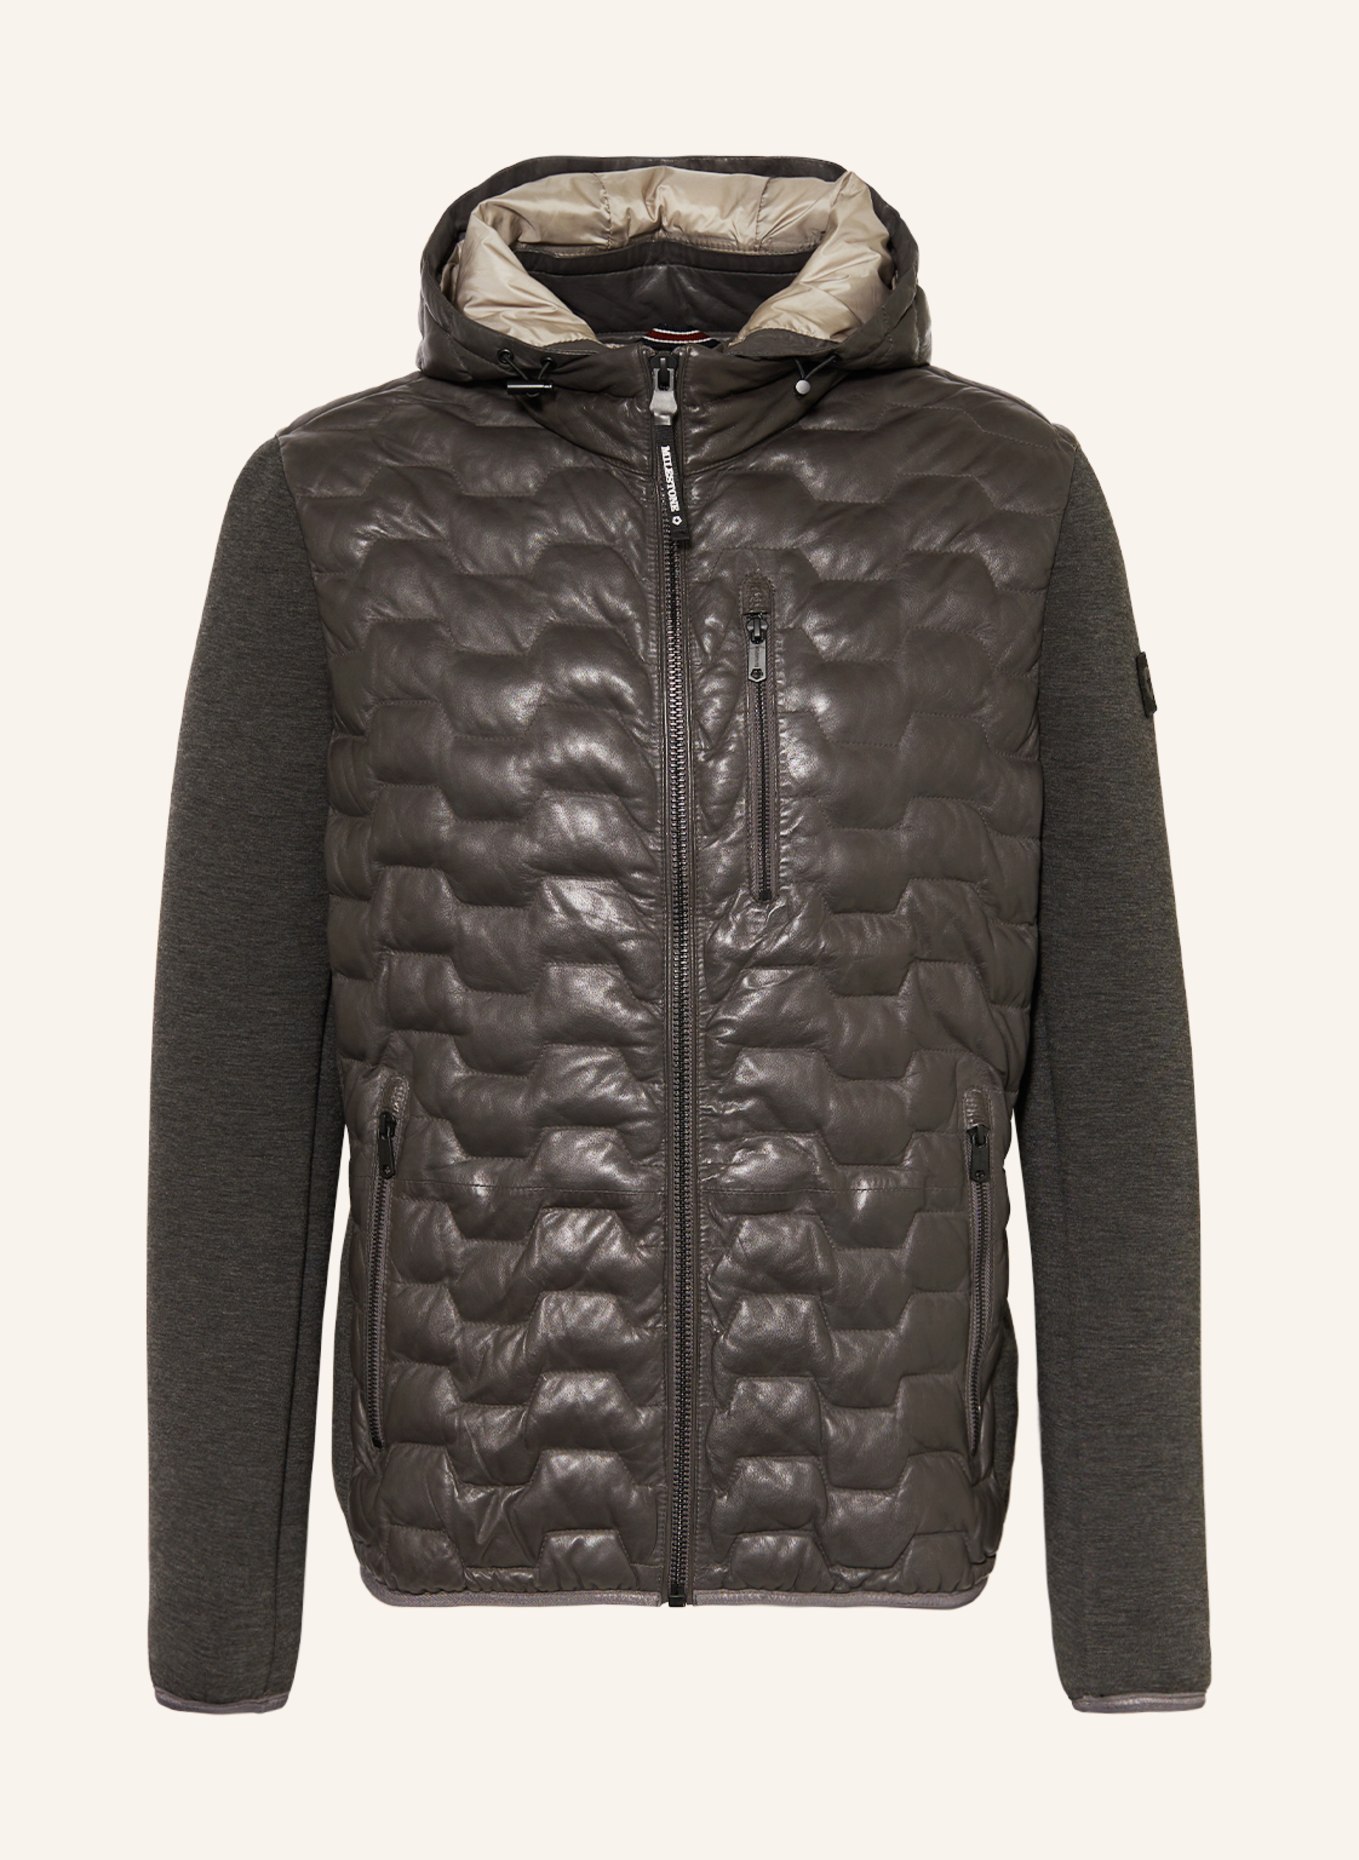 MILESTONE Leather jacket MSDARWIN in mixed materials with detachable hood, Color: DARK GRAY (Image 1)